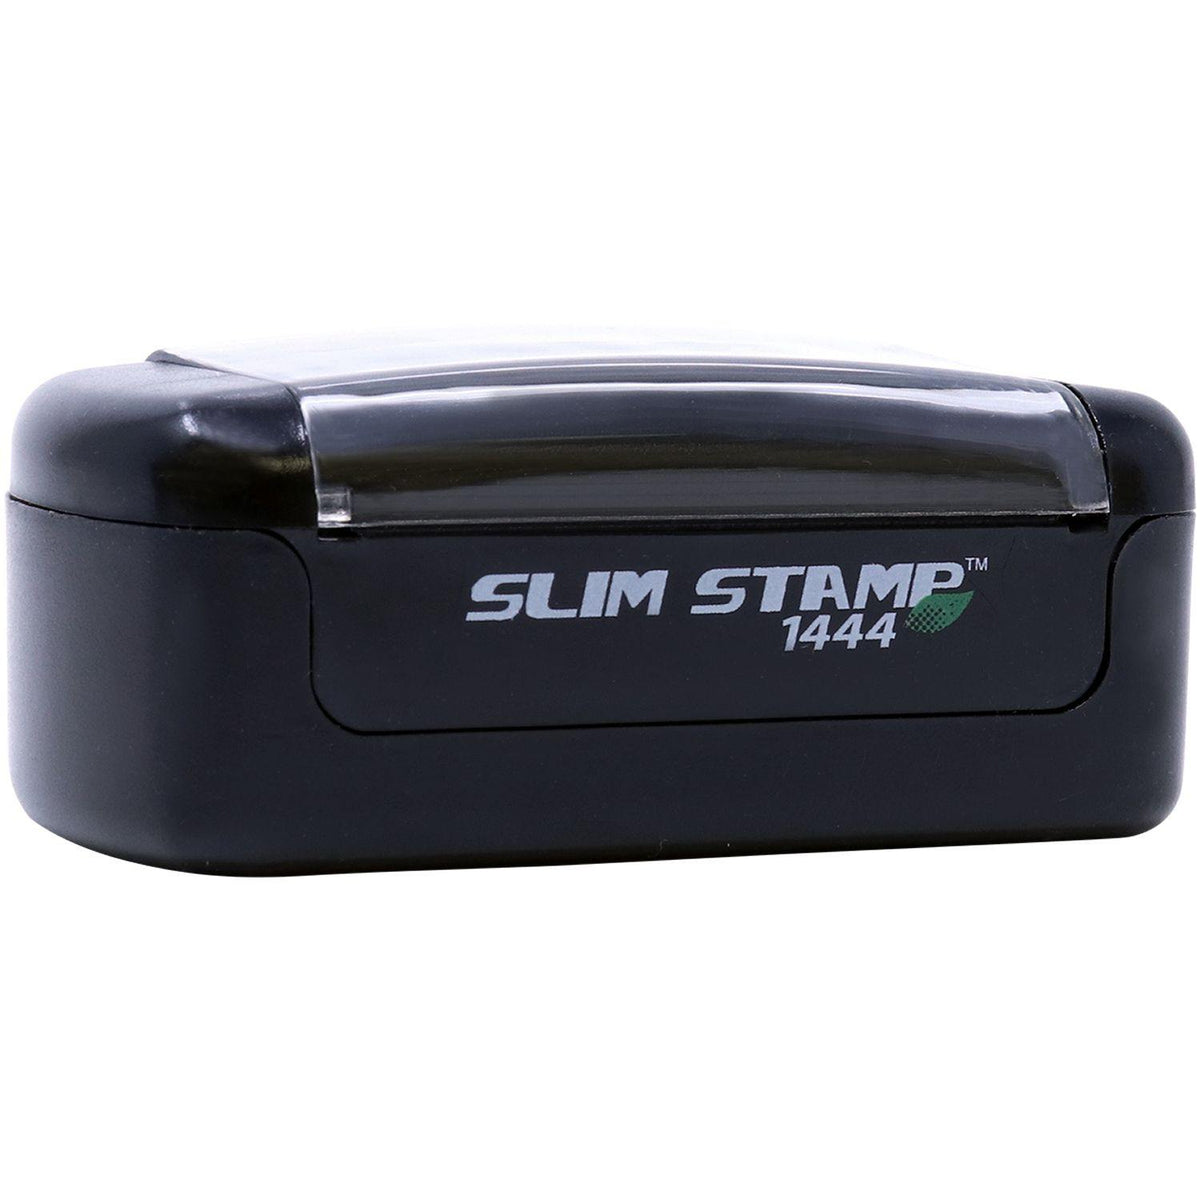 Slim Pre Inked Advanced Placement Stamp - Engineer Seal Stamps - Brand_Slim, Impression Size_Small, Stamp Type_Pre-Inked Stamp, Type of Use_Teacher